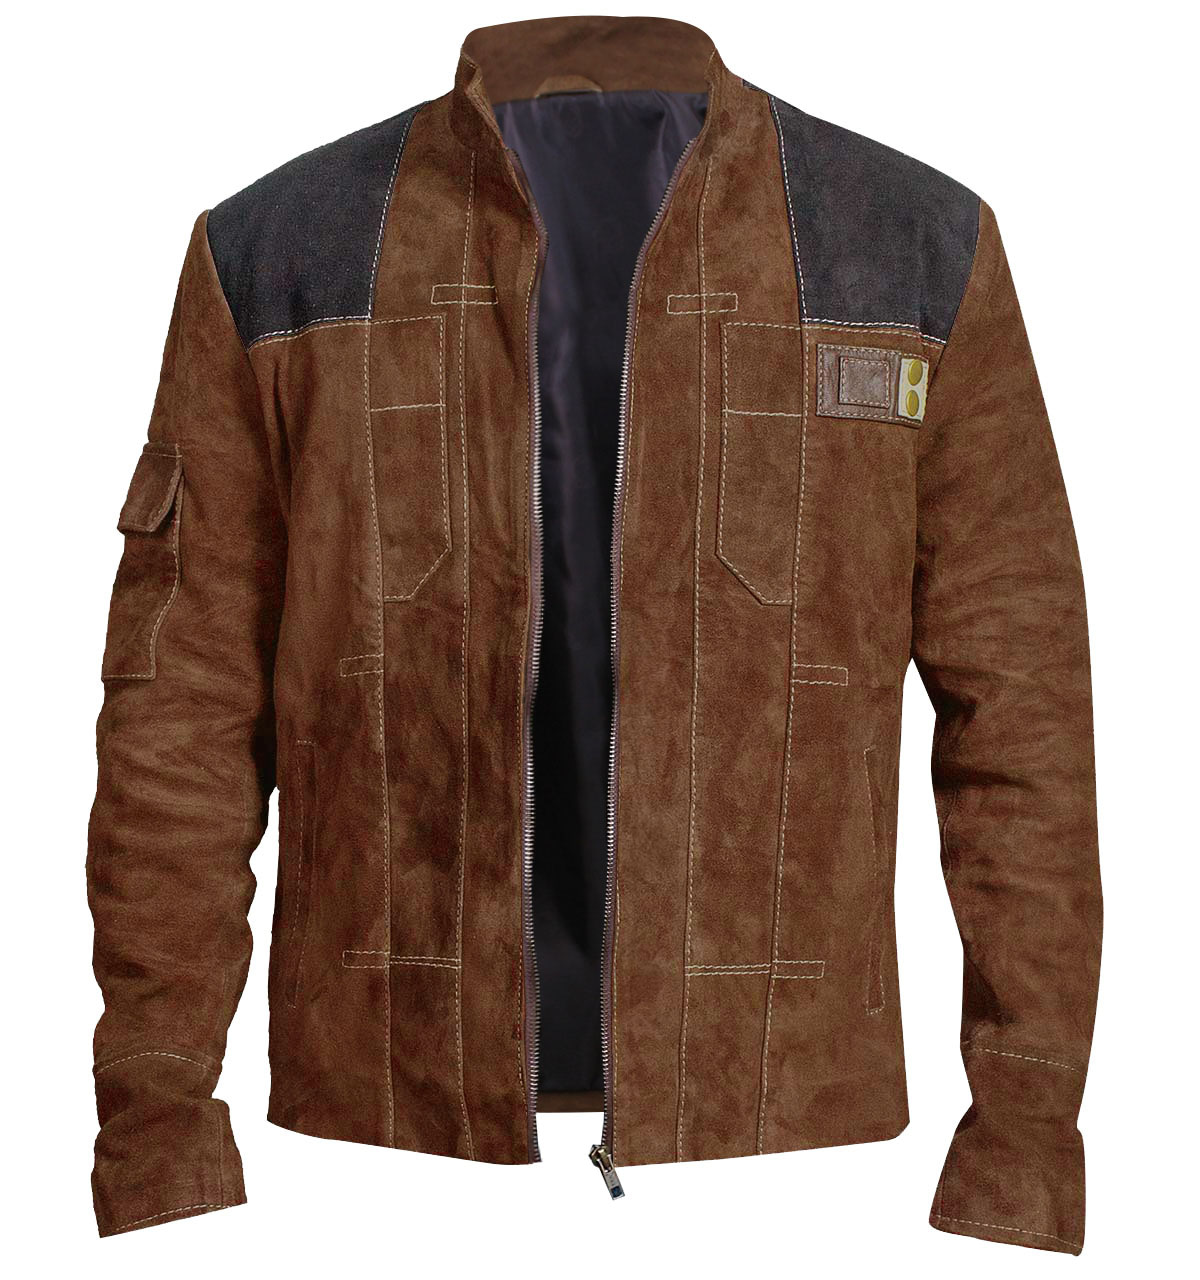 Han Solo Brown Suede Leather Jacket Zipper